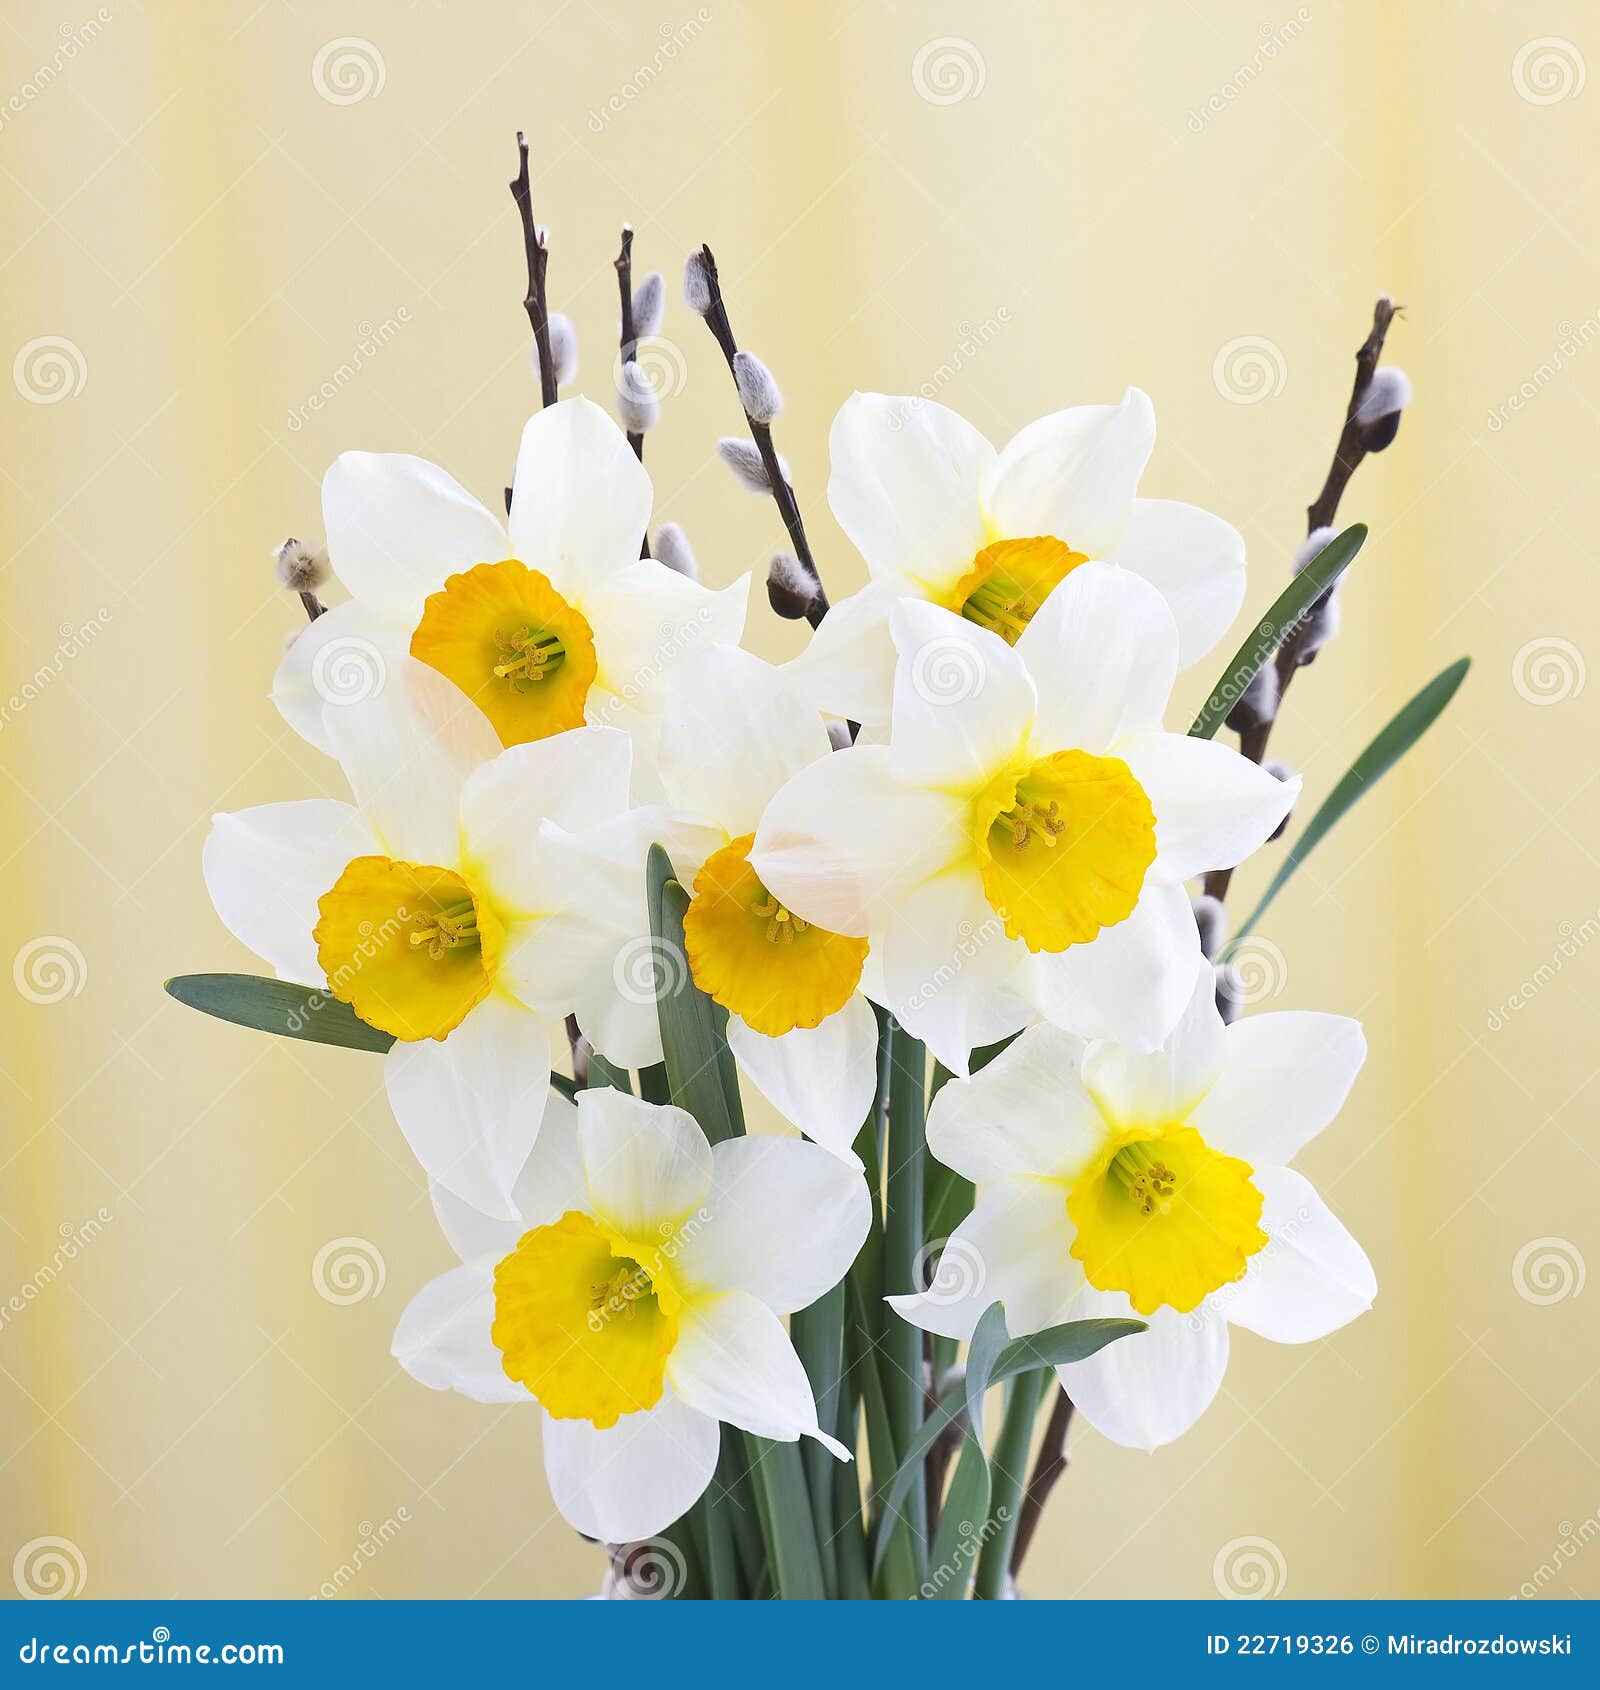 Narcissus bouquet stock photo. Image of background, bouquet - 22719326